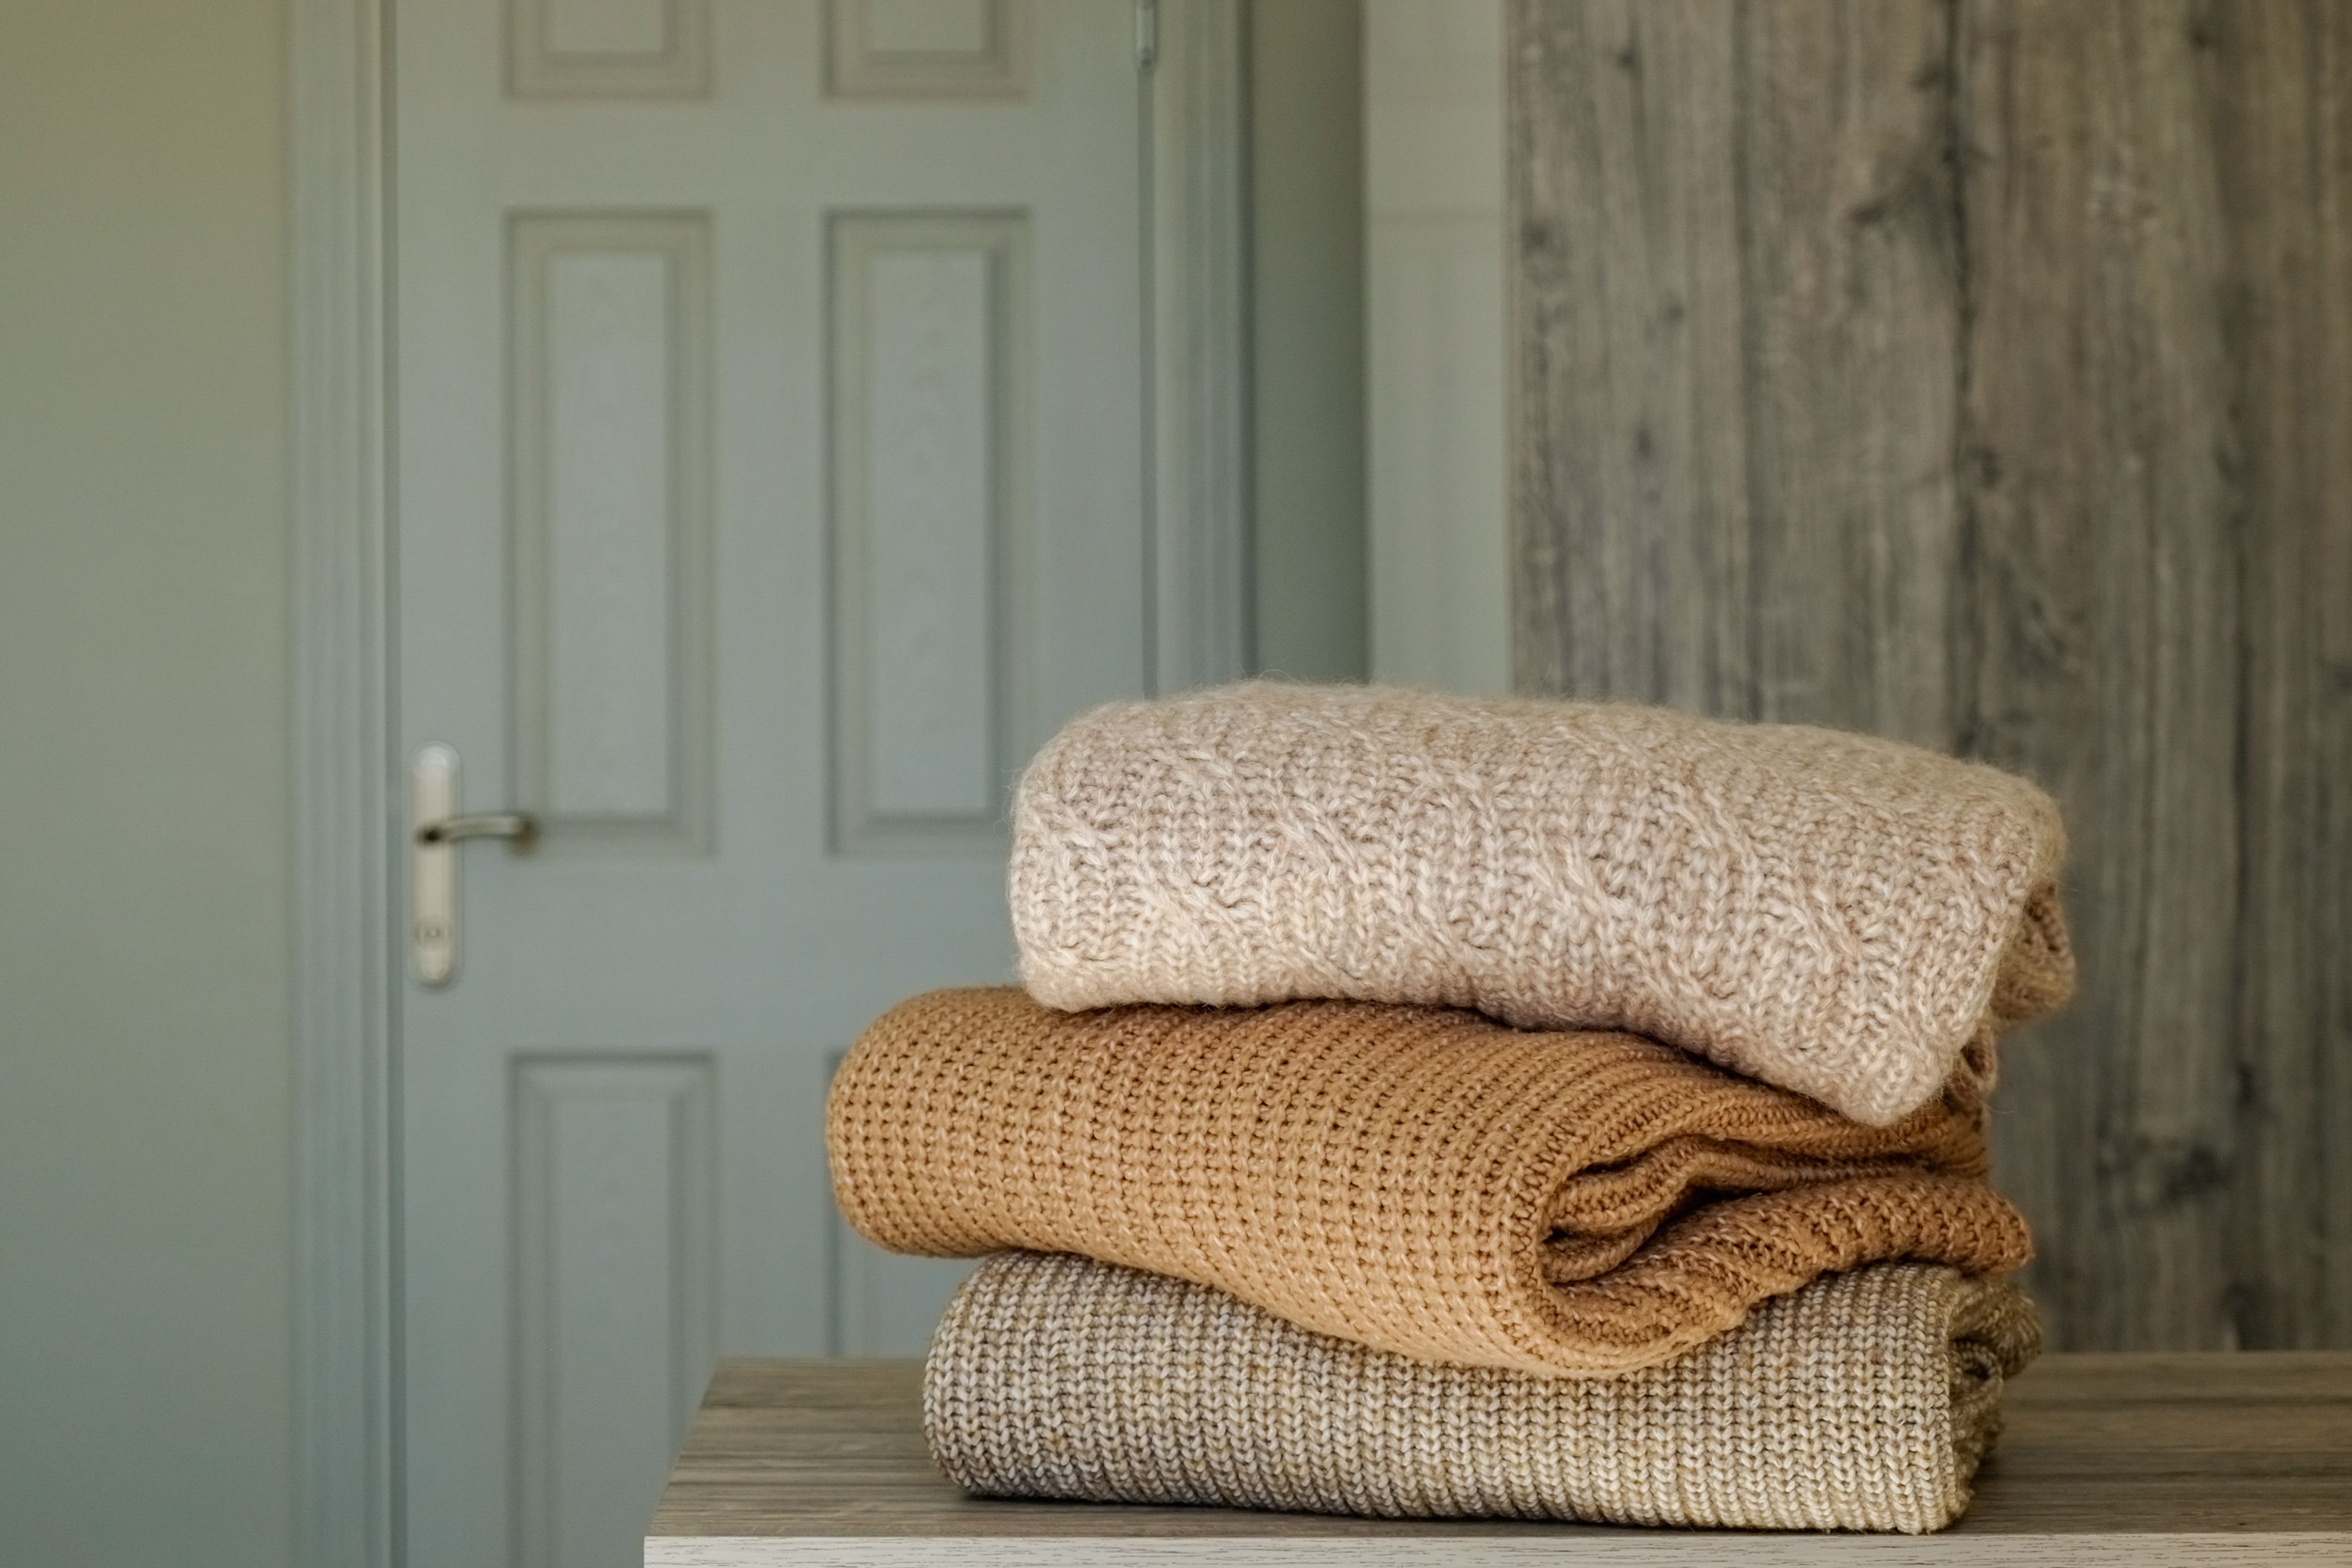 How To Wash Cashmere, Wool, Silk, and Other Luxury Fabrics Safely